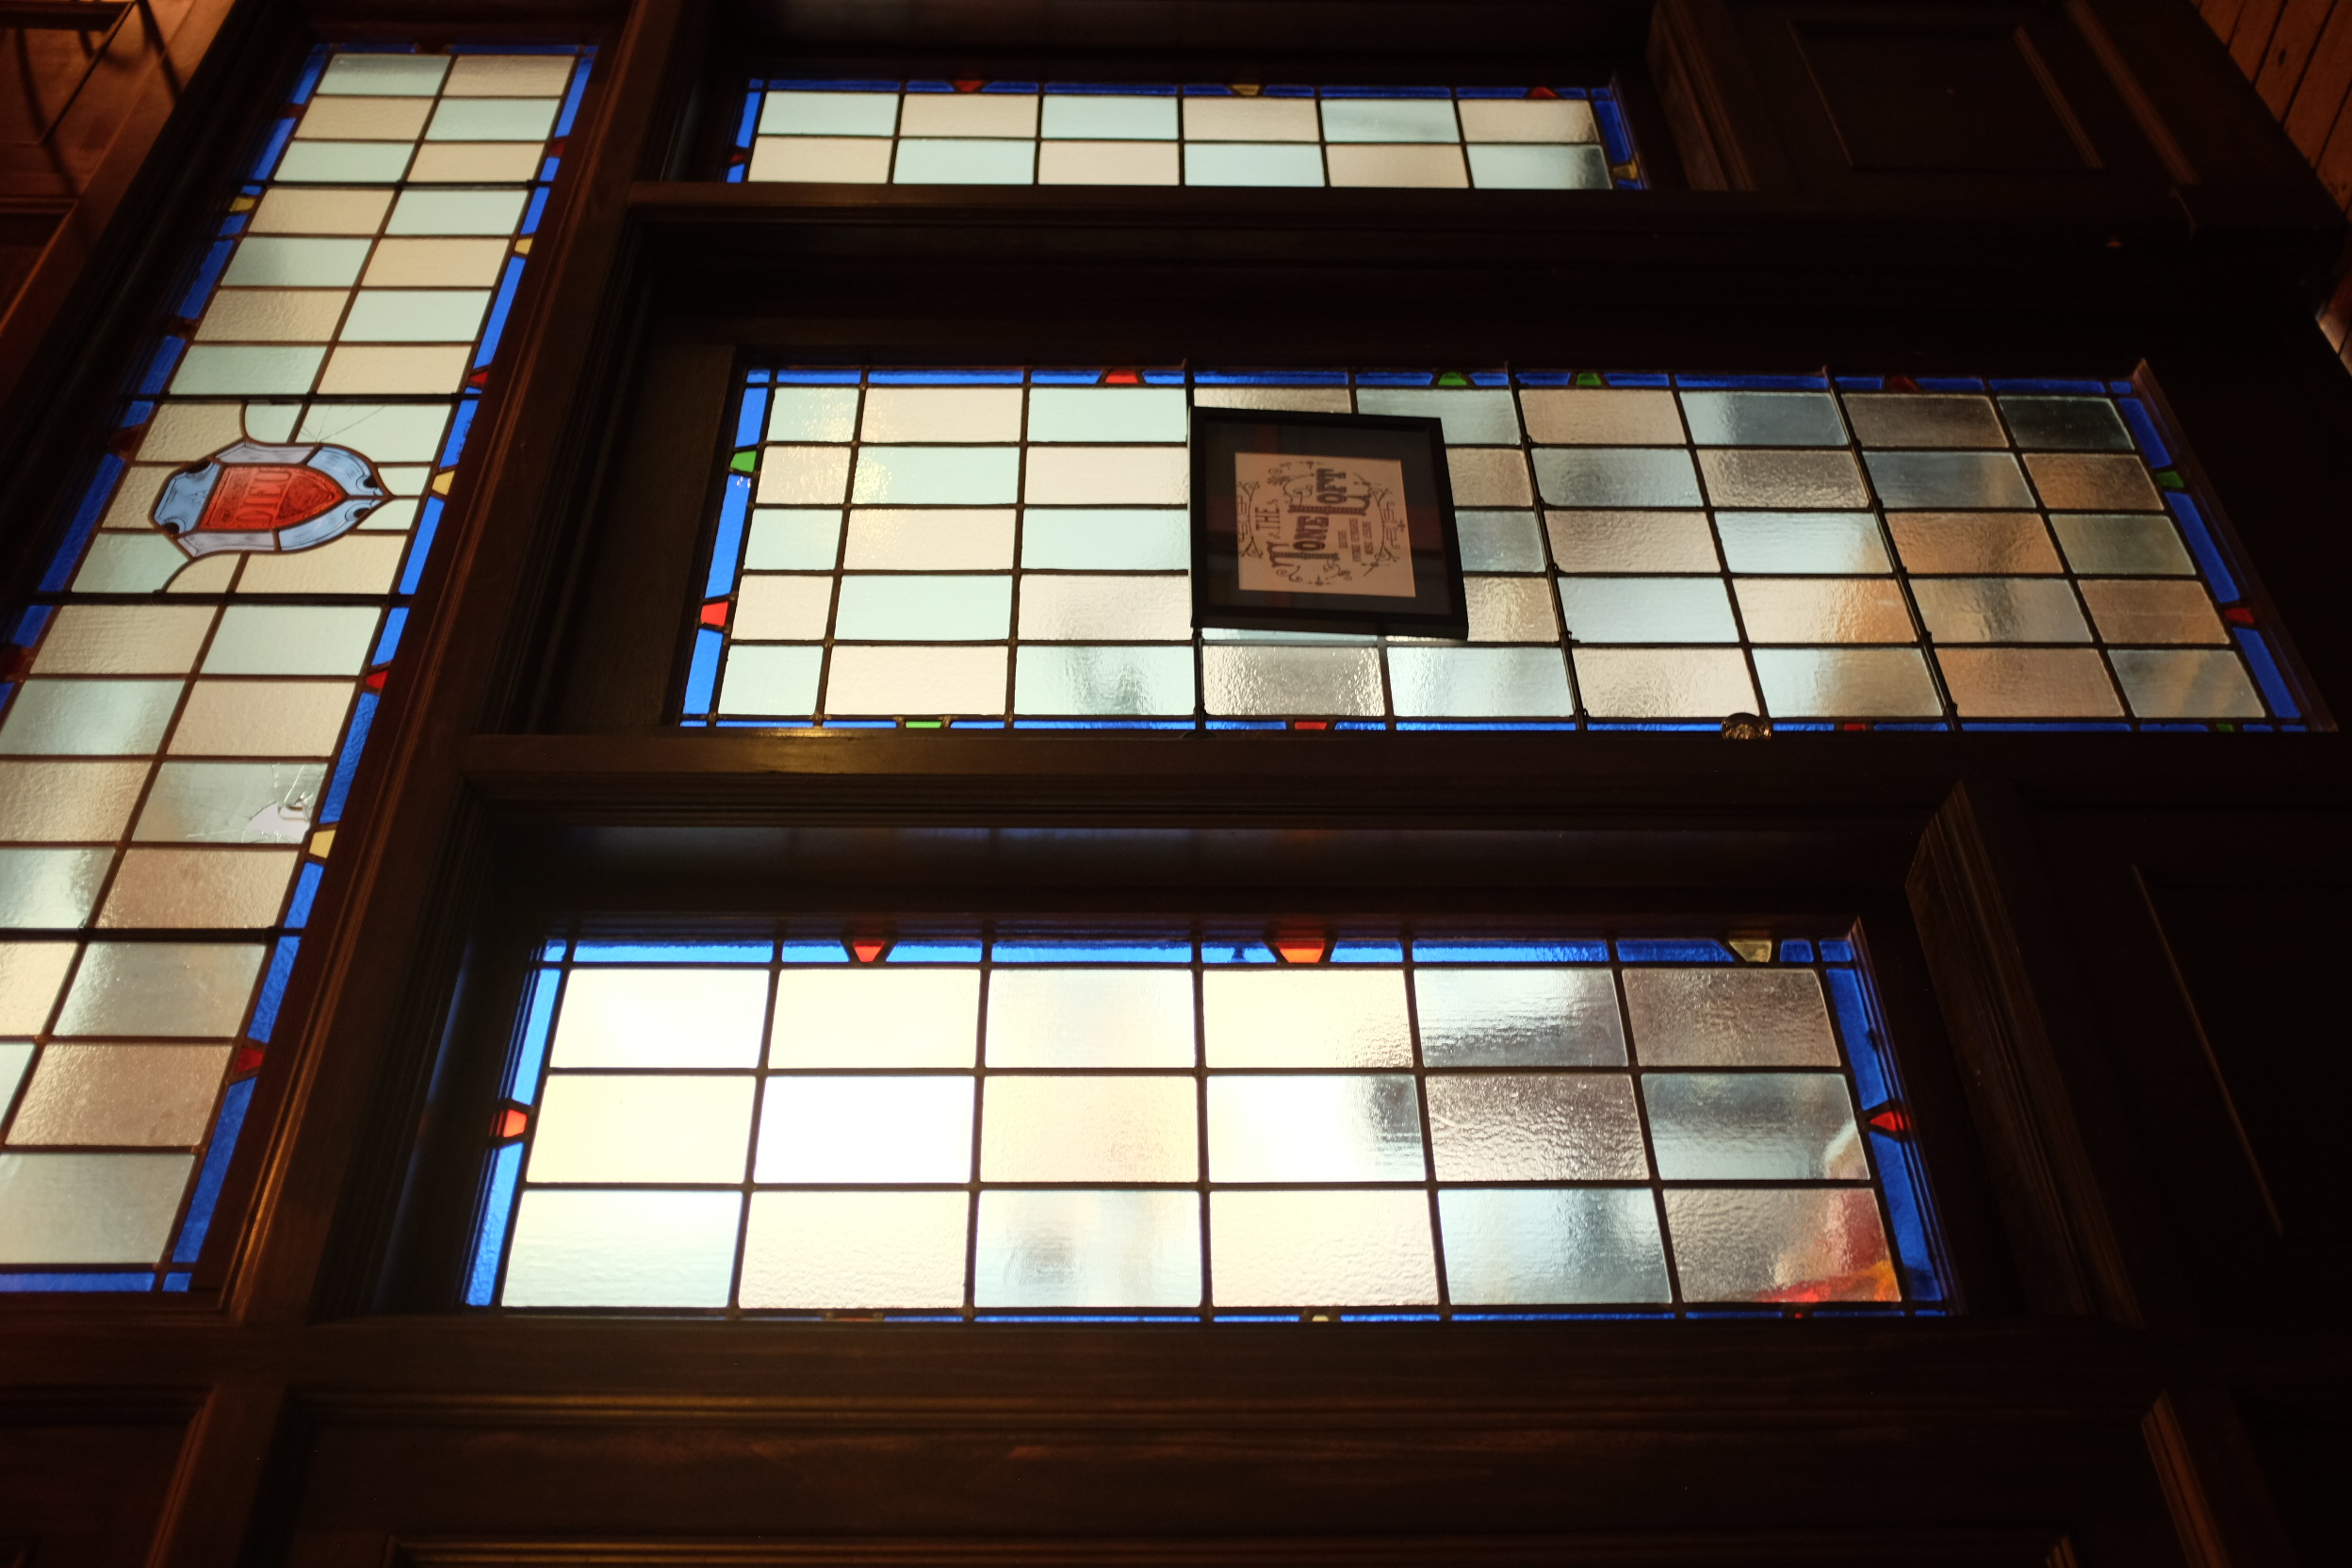 A photo from an angle of four stained glass panels, three in a row with a fourth across the top. All three panels are checkered in blue and pink. The top panel has a shield emblem in red, blue, and green. The bottom middle panel has a sign which reads 'Tone Loft'.